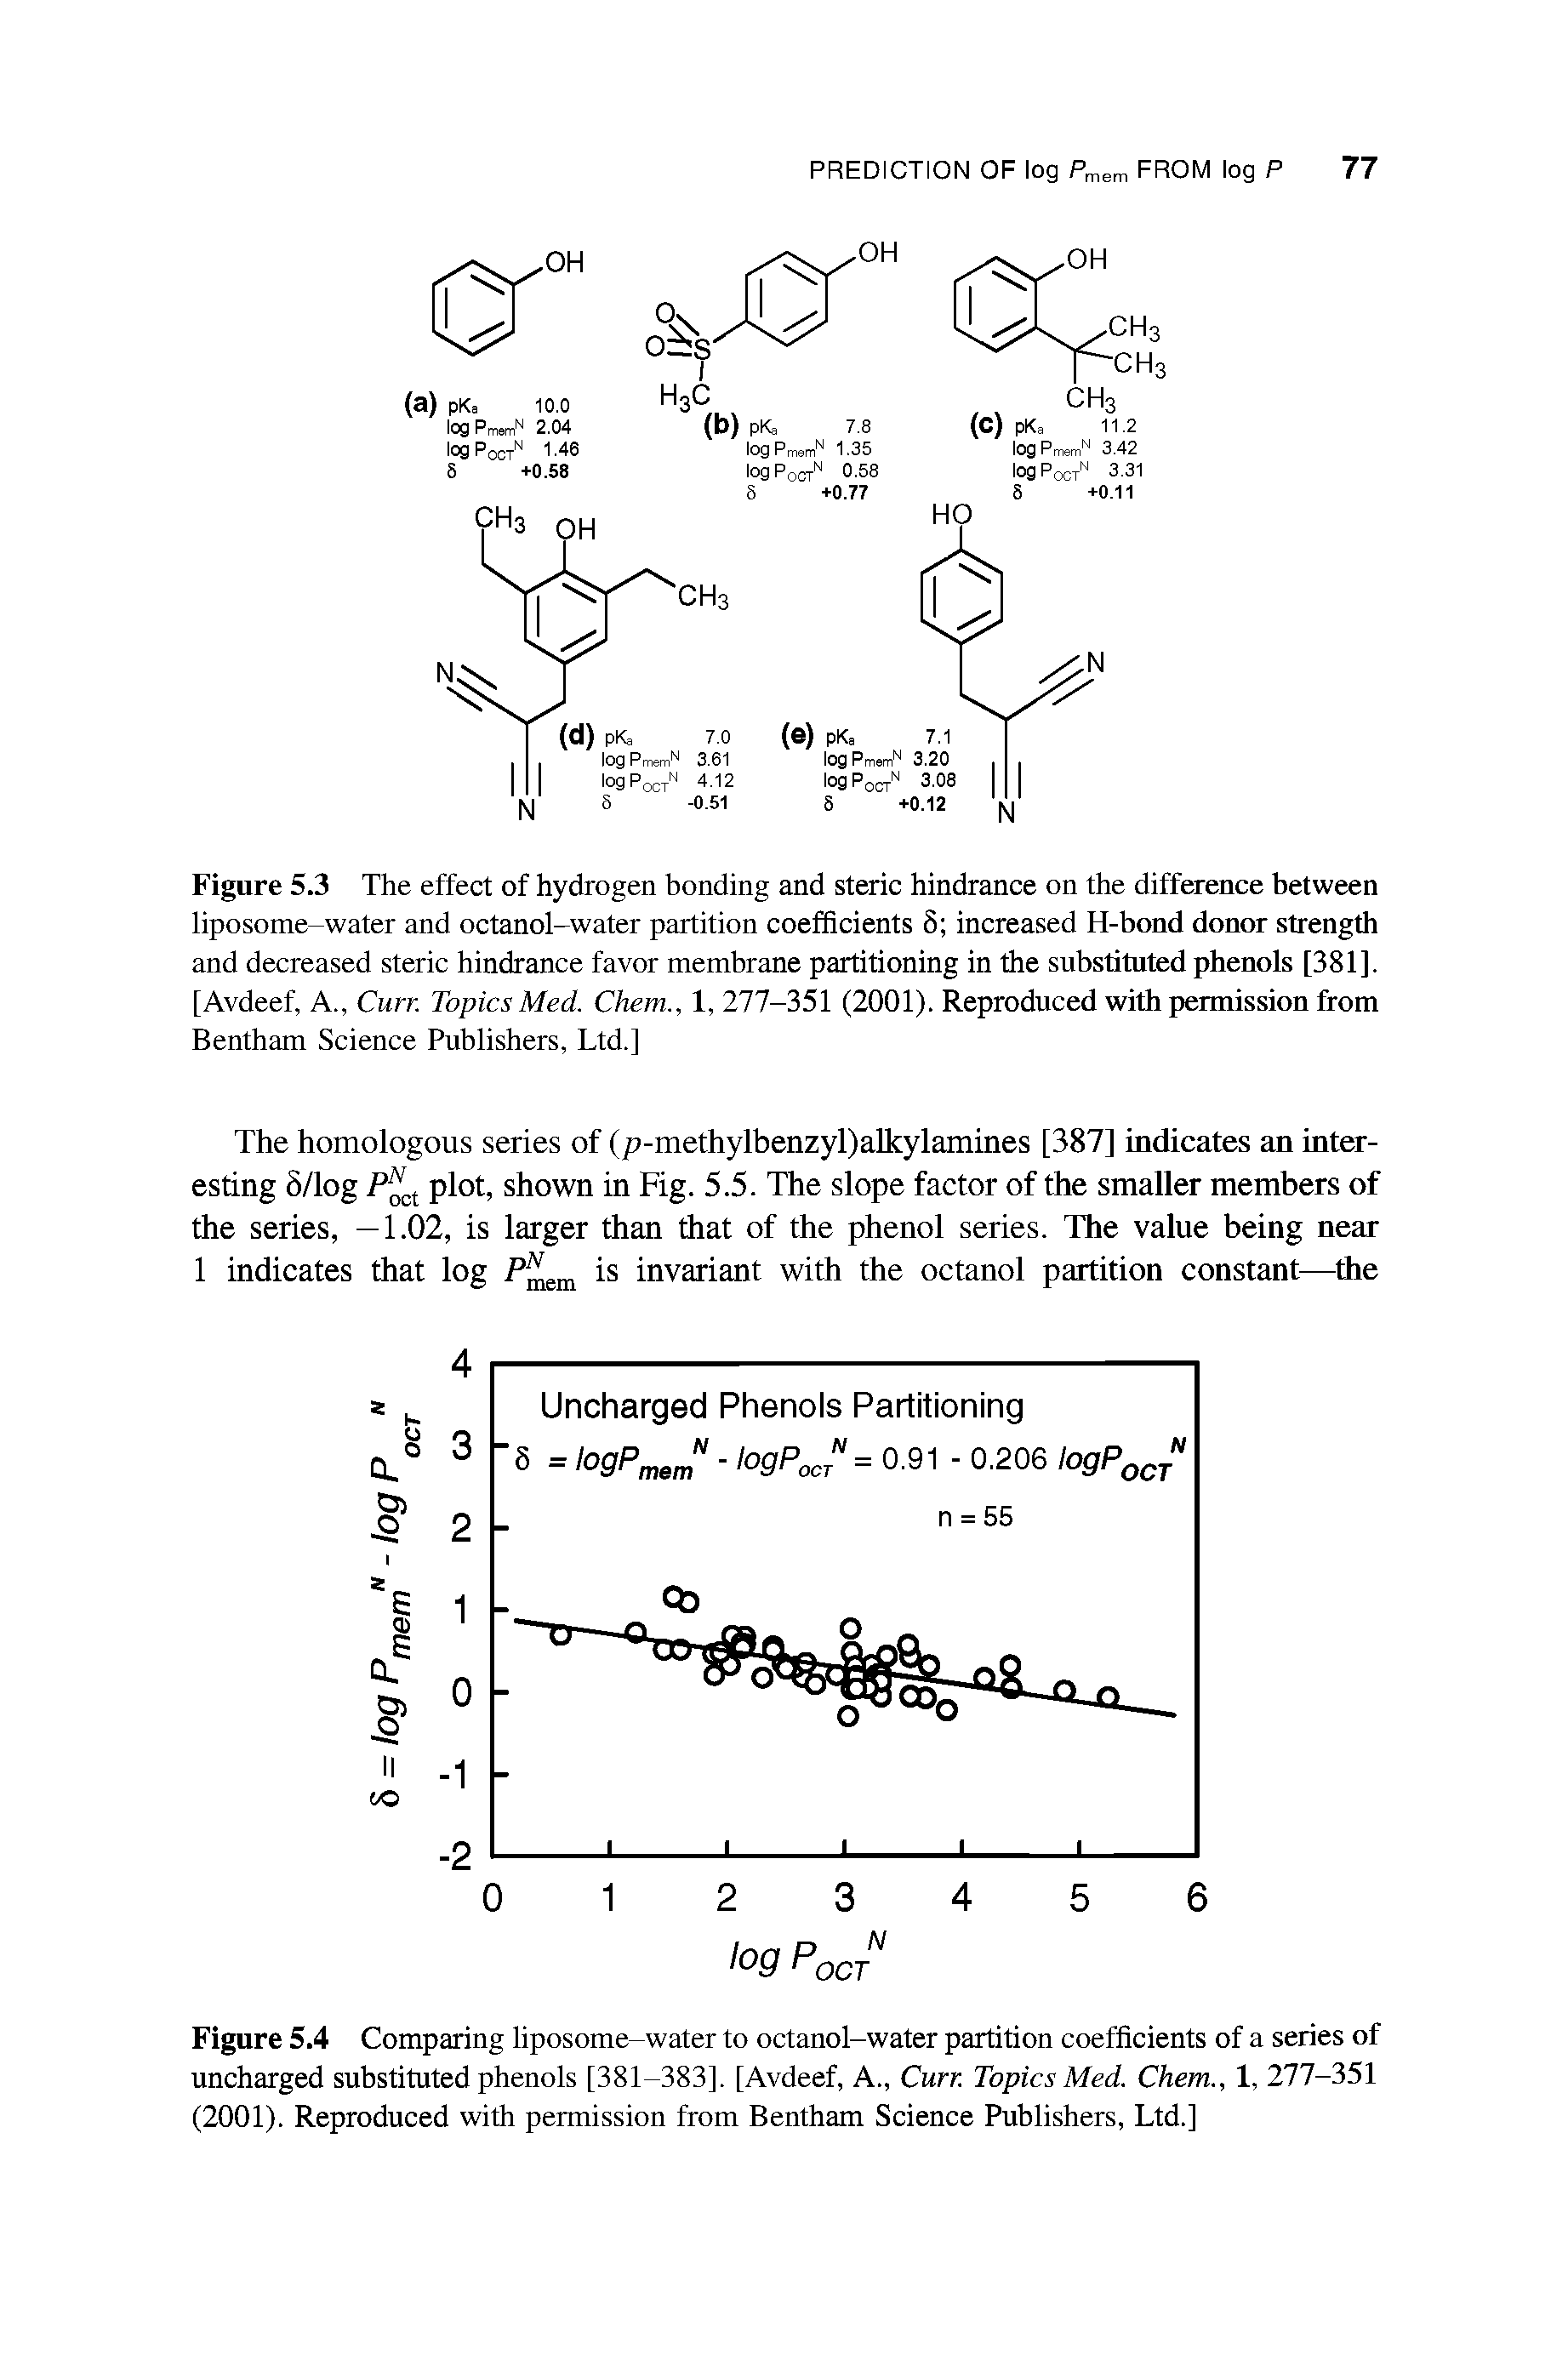 Figure 5.3 The effect of hydrogen bonding and steric hindrance on the difference between liposome-water and octanol-water partition coefficients 8 increased H-bond donor strength and decreased steric hindrance favor membrane partitioning in the substituted phenols [381]. [Avdeef, A., Cun Topics Med. Chem., 1, 277-351 (2001). Reproduced with permission from Bentham Science Publishers, Ltd.]...